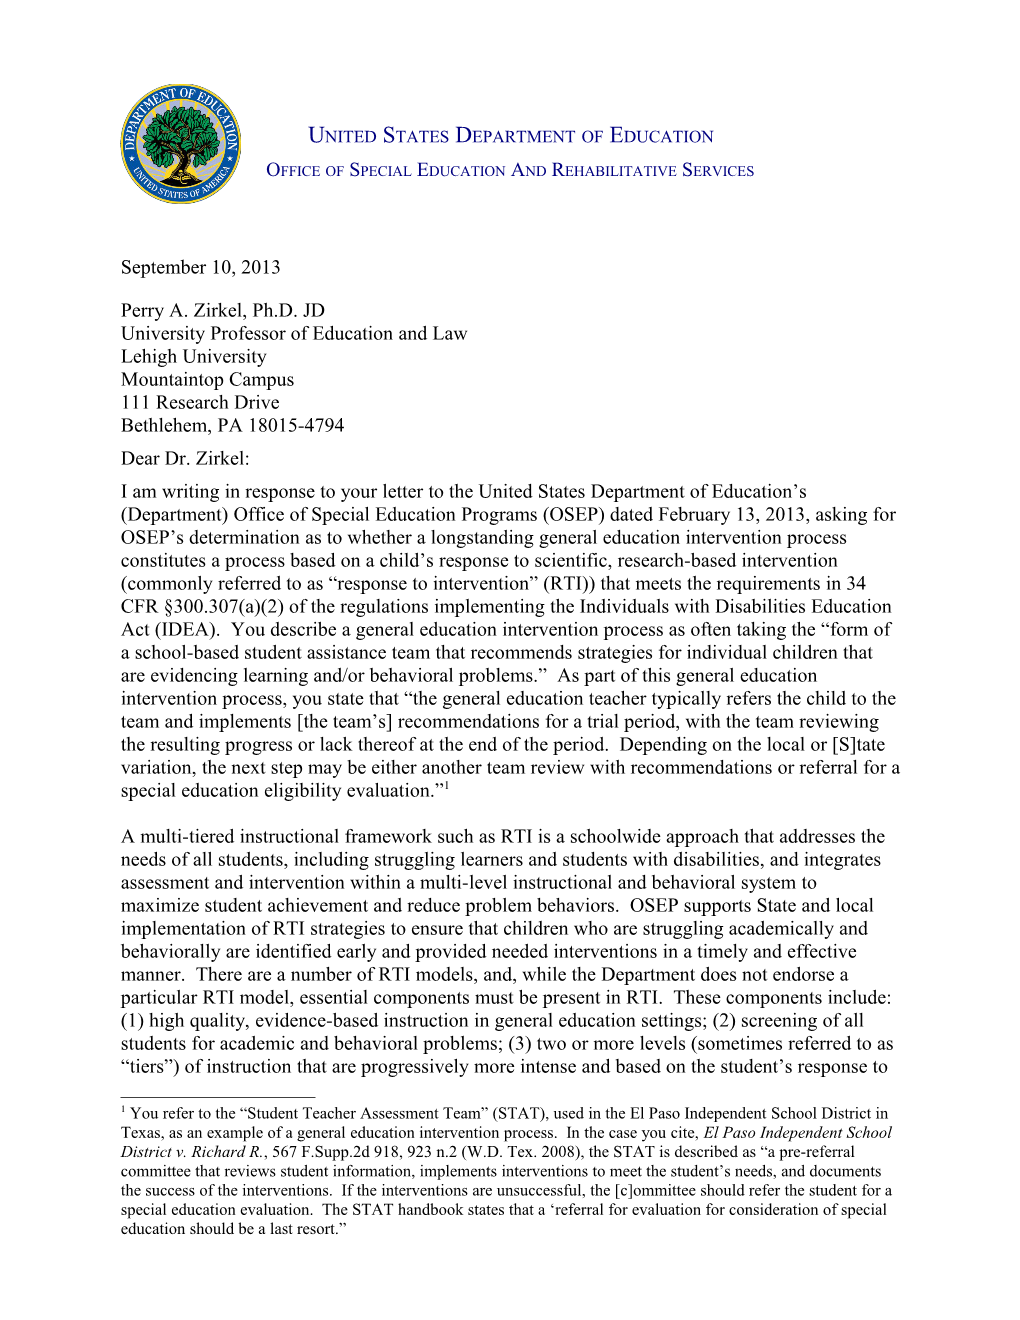 Policy Letter to Perry A. Zirkel-RTI-9-10-13